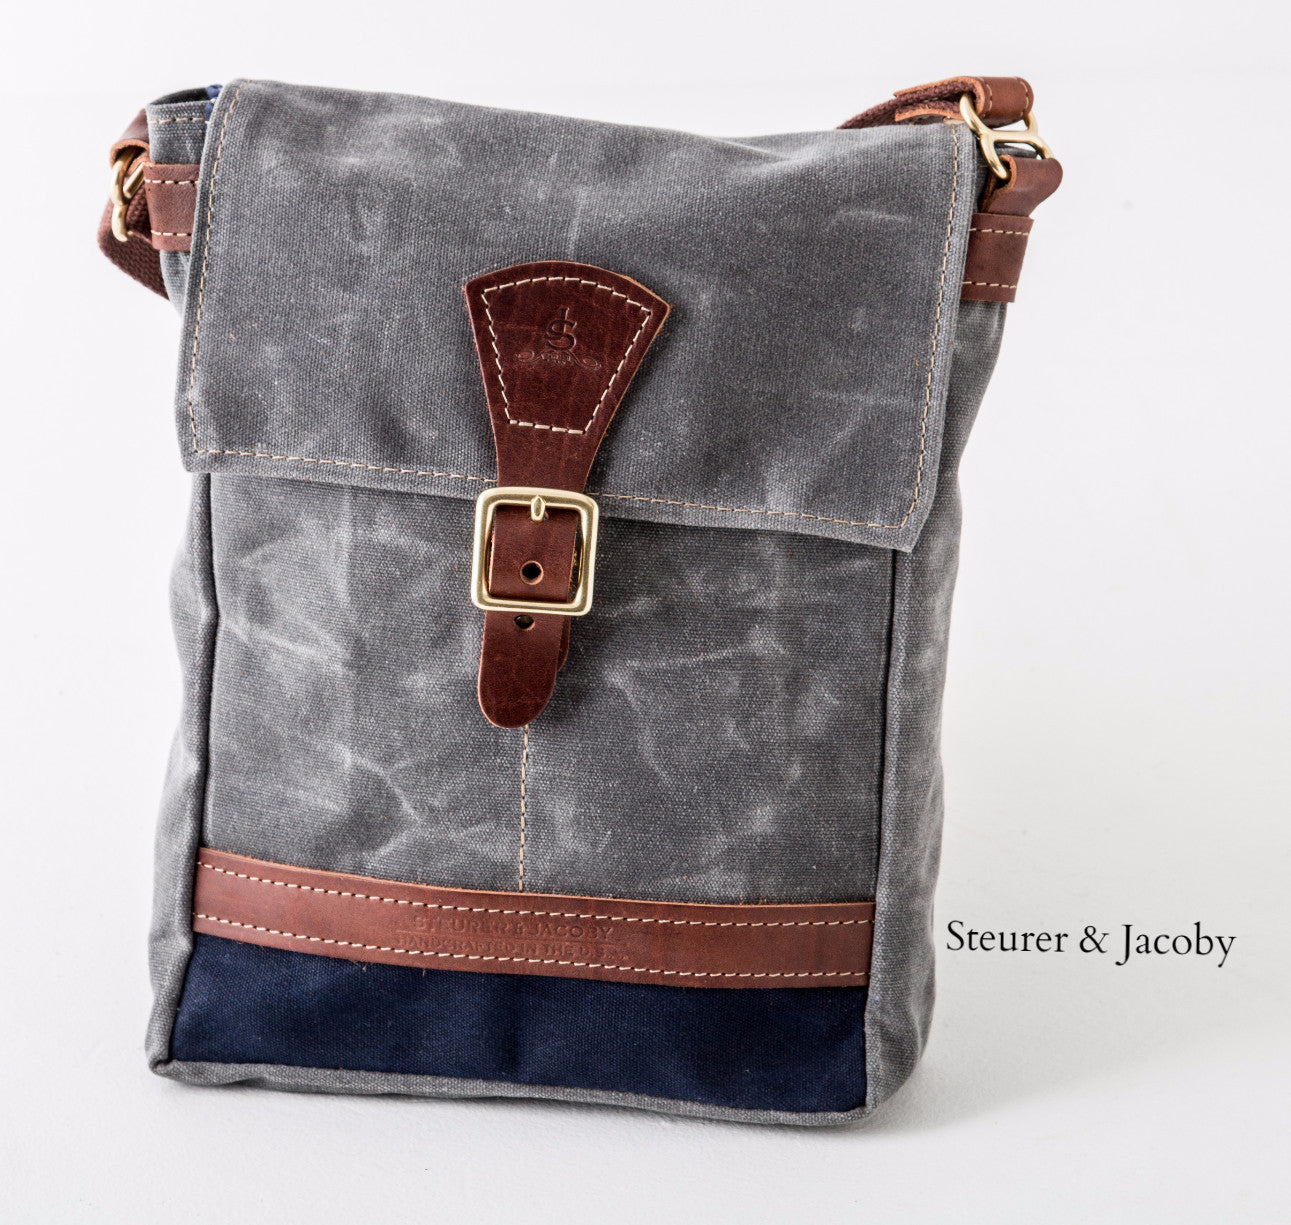 Satchel - Charcoal Gray and Navy - Steurer & Jacoby